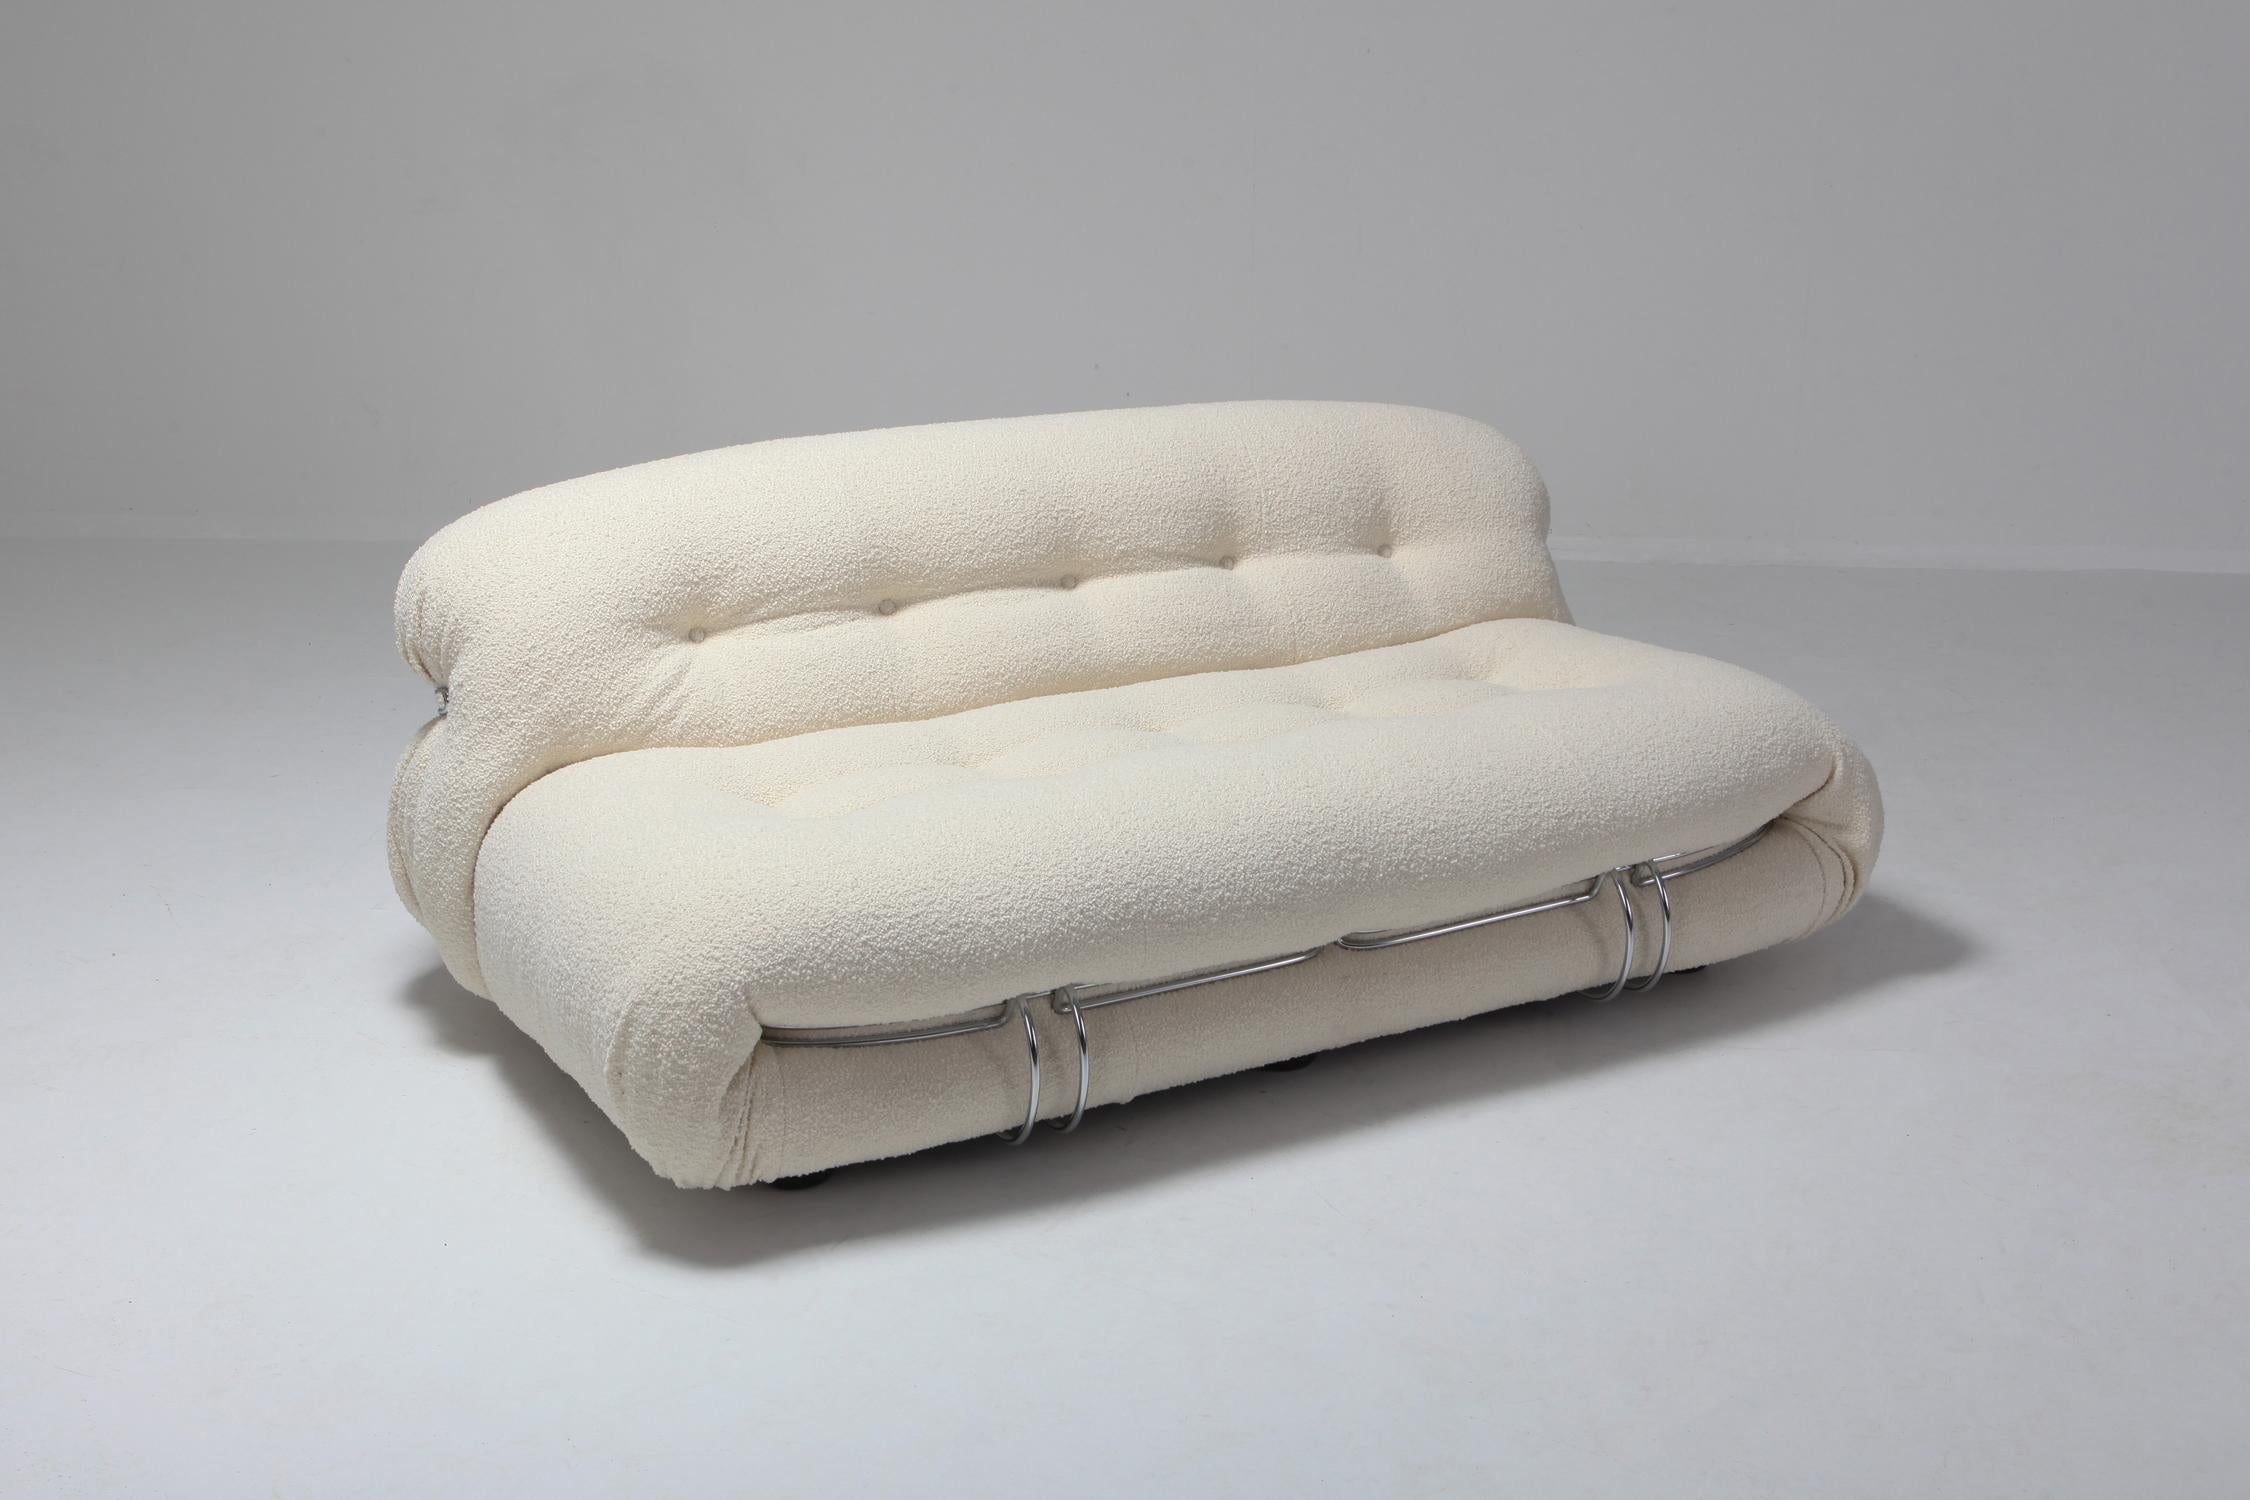 Mid-Century Modern sofa by Afra and Tobia Scarpa reupholstered in ivory Lelièvre Parisian bouclé wool.
Manufactured by Cassina in the 1970s, the Soriana collection was meant to express beauty and comfort by using a whole bundle of fabric held by a